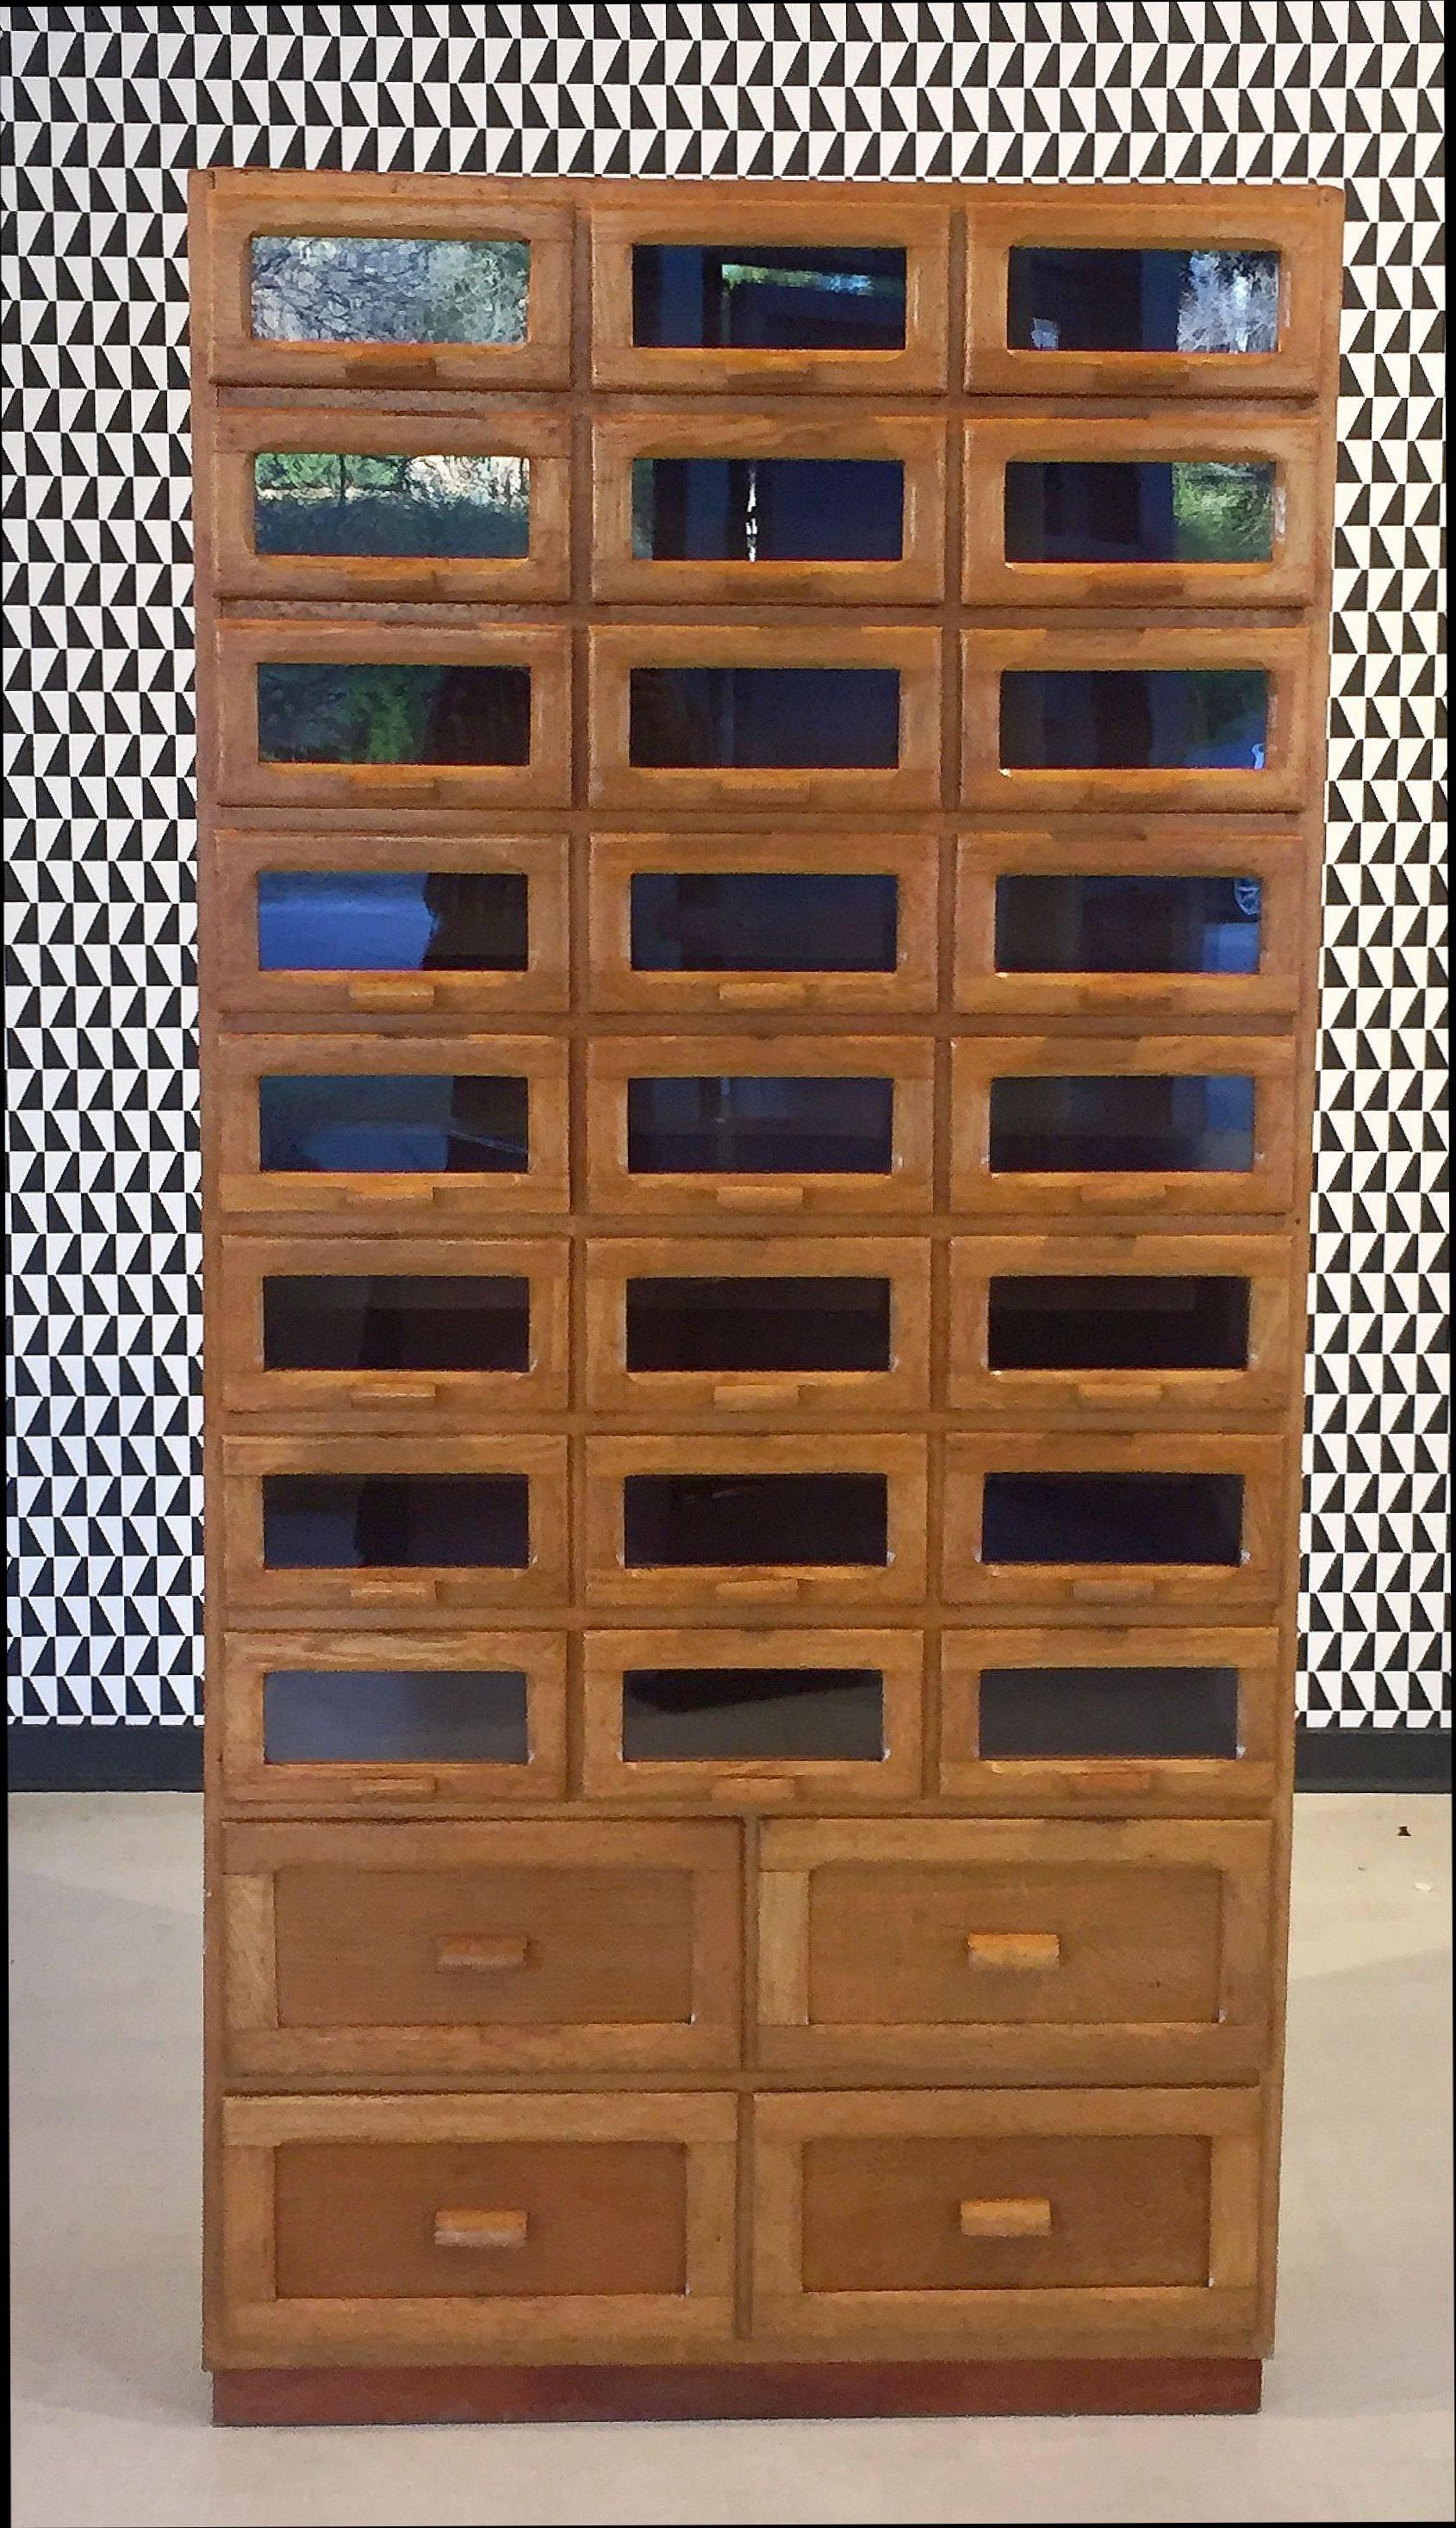 An exceptional large vintage haberdashery or haberdasher's cabinet from England featuring:

(24) glass-fronted drawers over four cupboard style drawers - (28) drawers total.

The fitted drawers with wooden pulls and set upon a raised